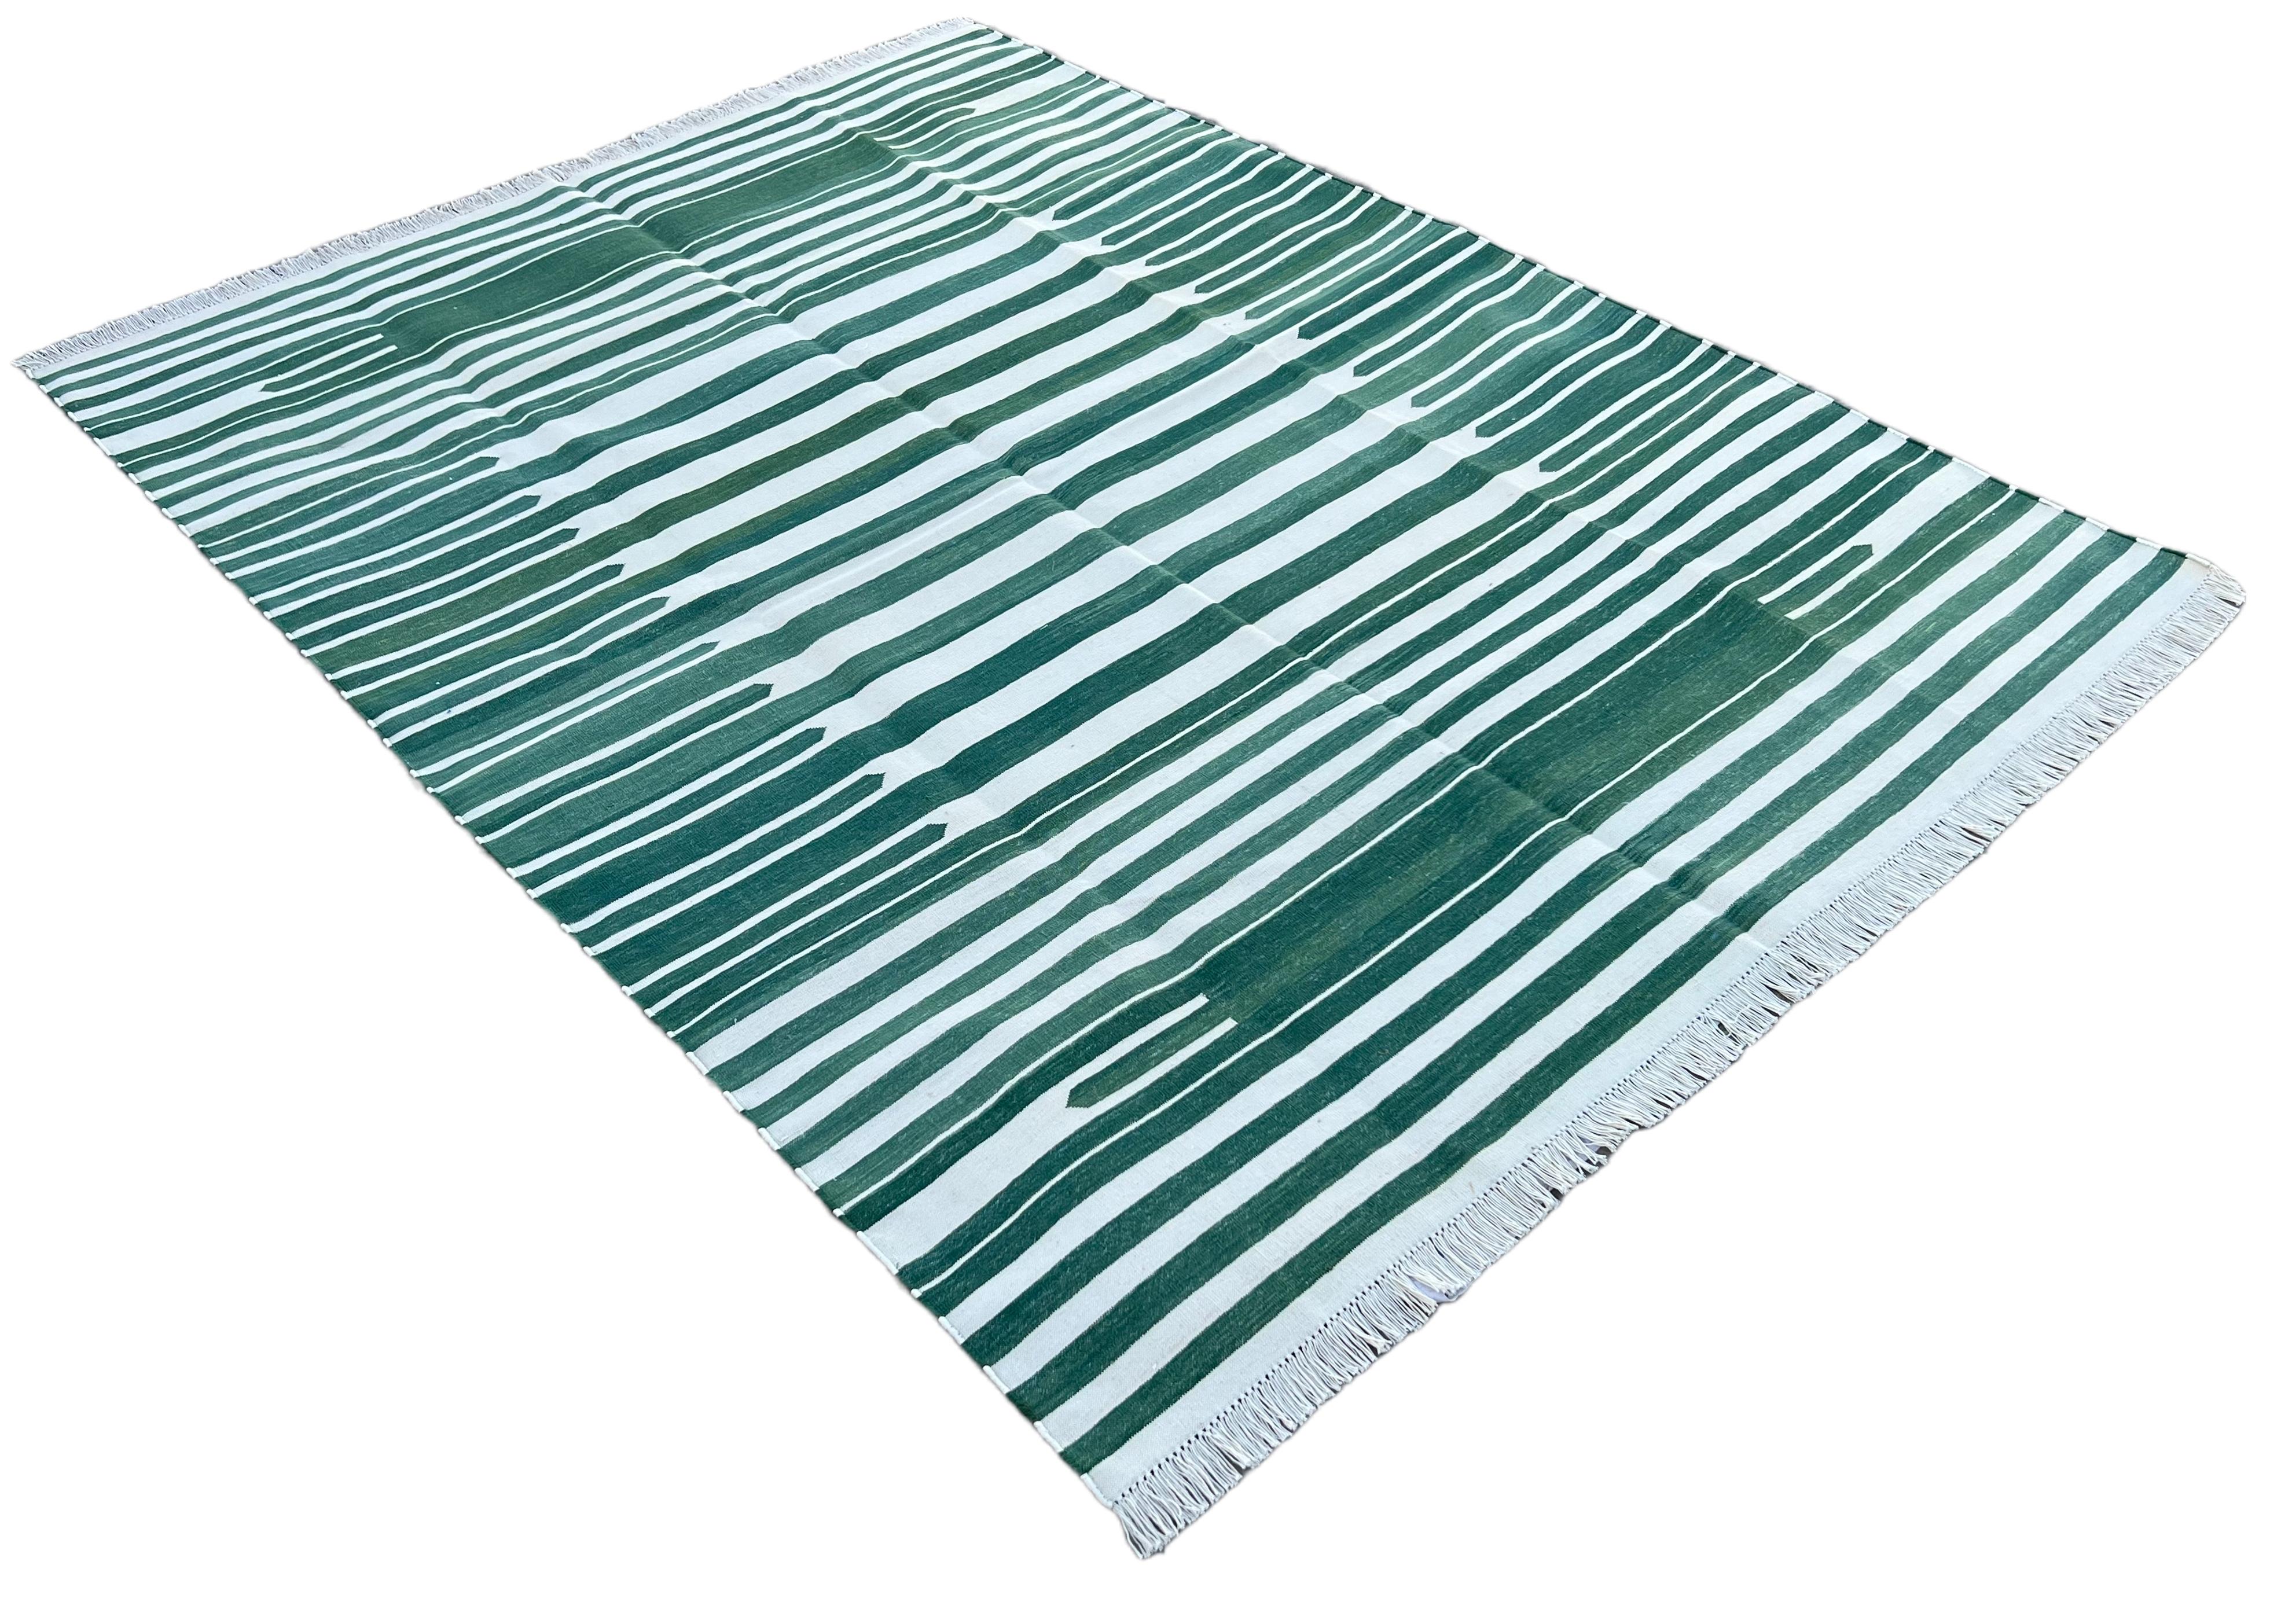 Cotton Natural Vegetable Dyed Forest Green And White Striped Rug-5'x7'
These special flat-weave dhurries are hand-woven with 15 ply 100% cotton yarn. Due to the special manufacturing techniques used to create our rugs, the size and color of each